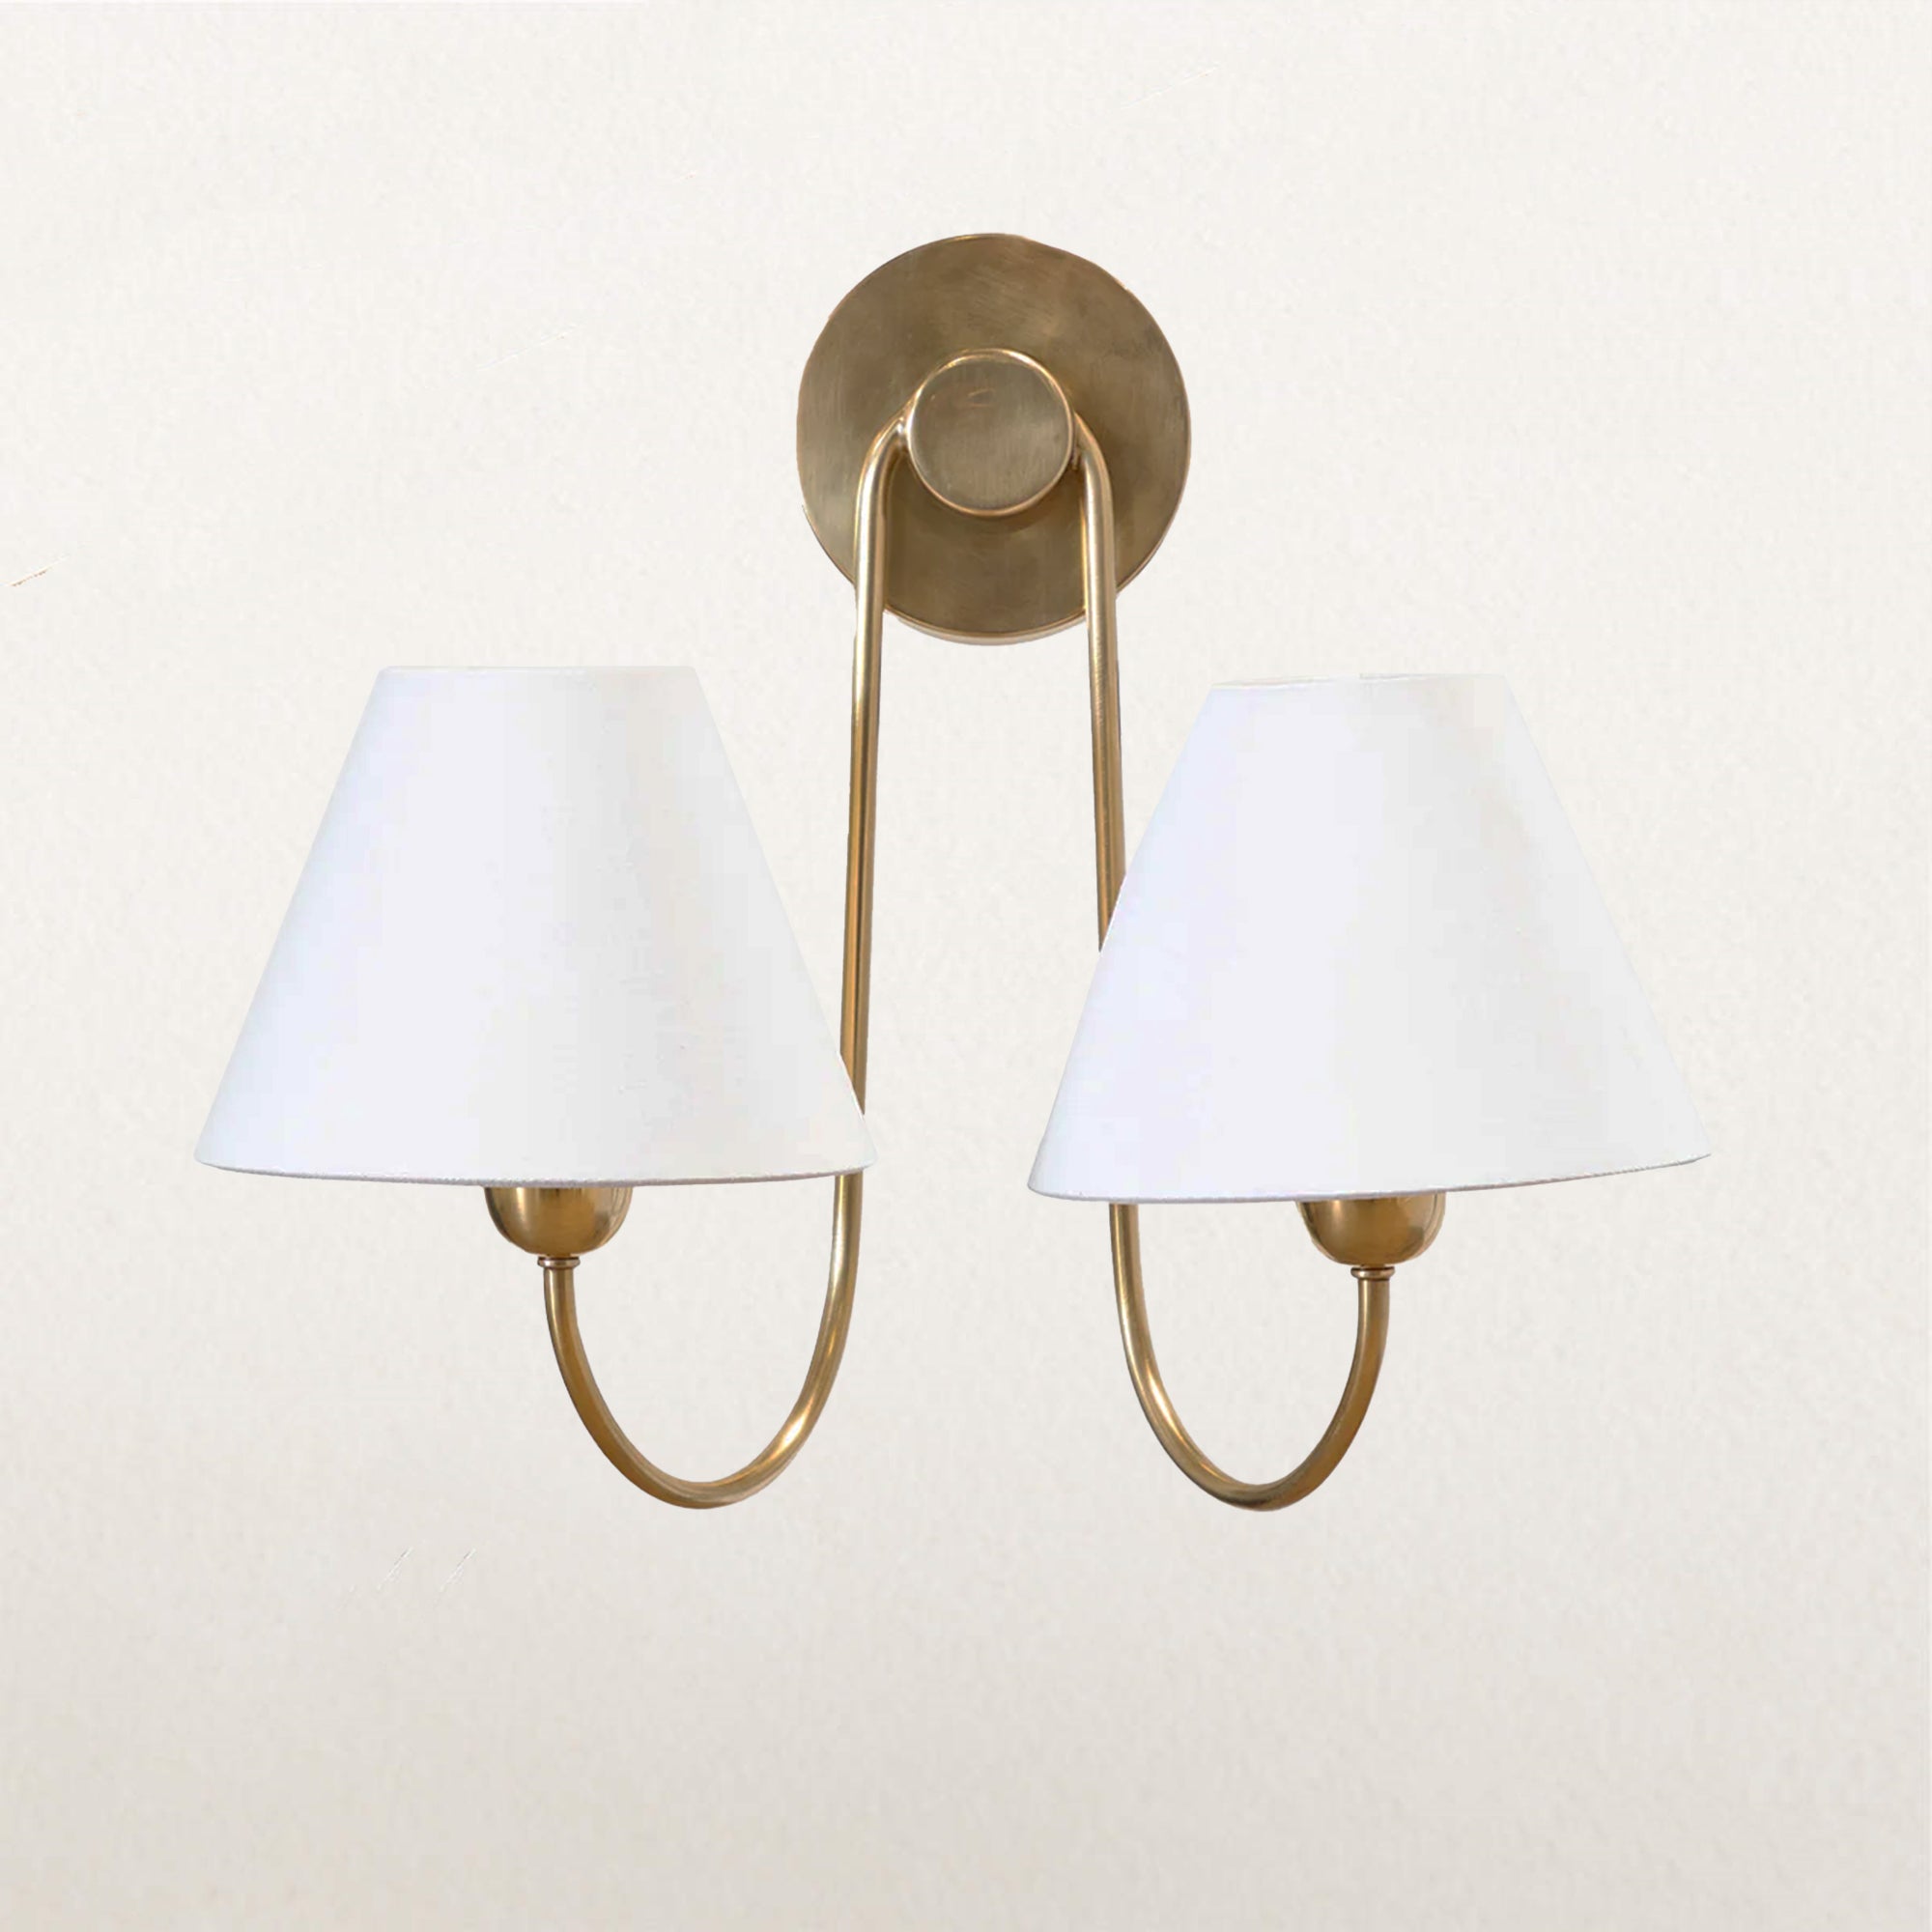 Double Swoop Sconce, Wainwright Double Swoop Sconce